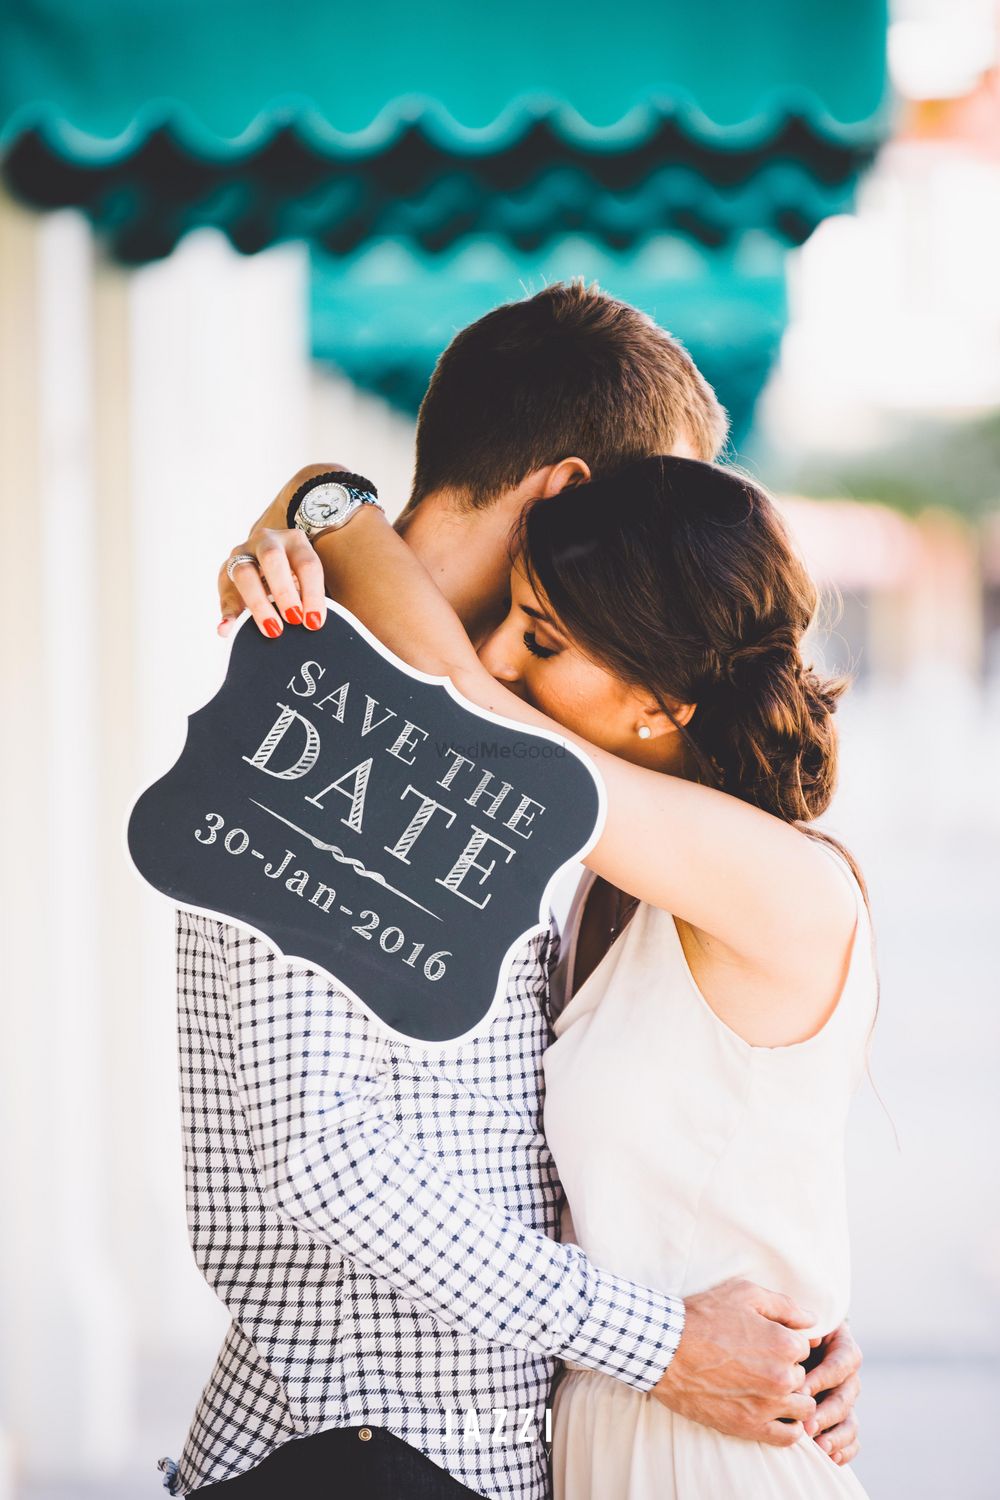 Photo of Save the date idea with couple portrait